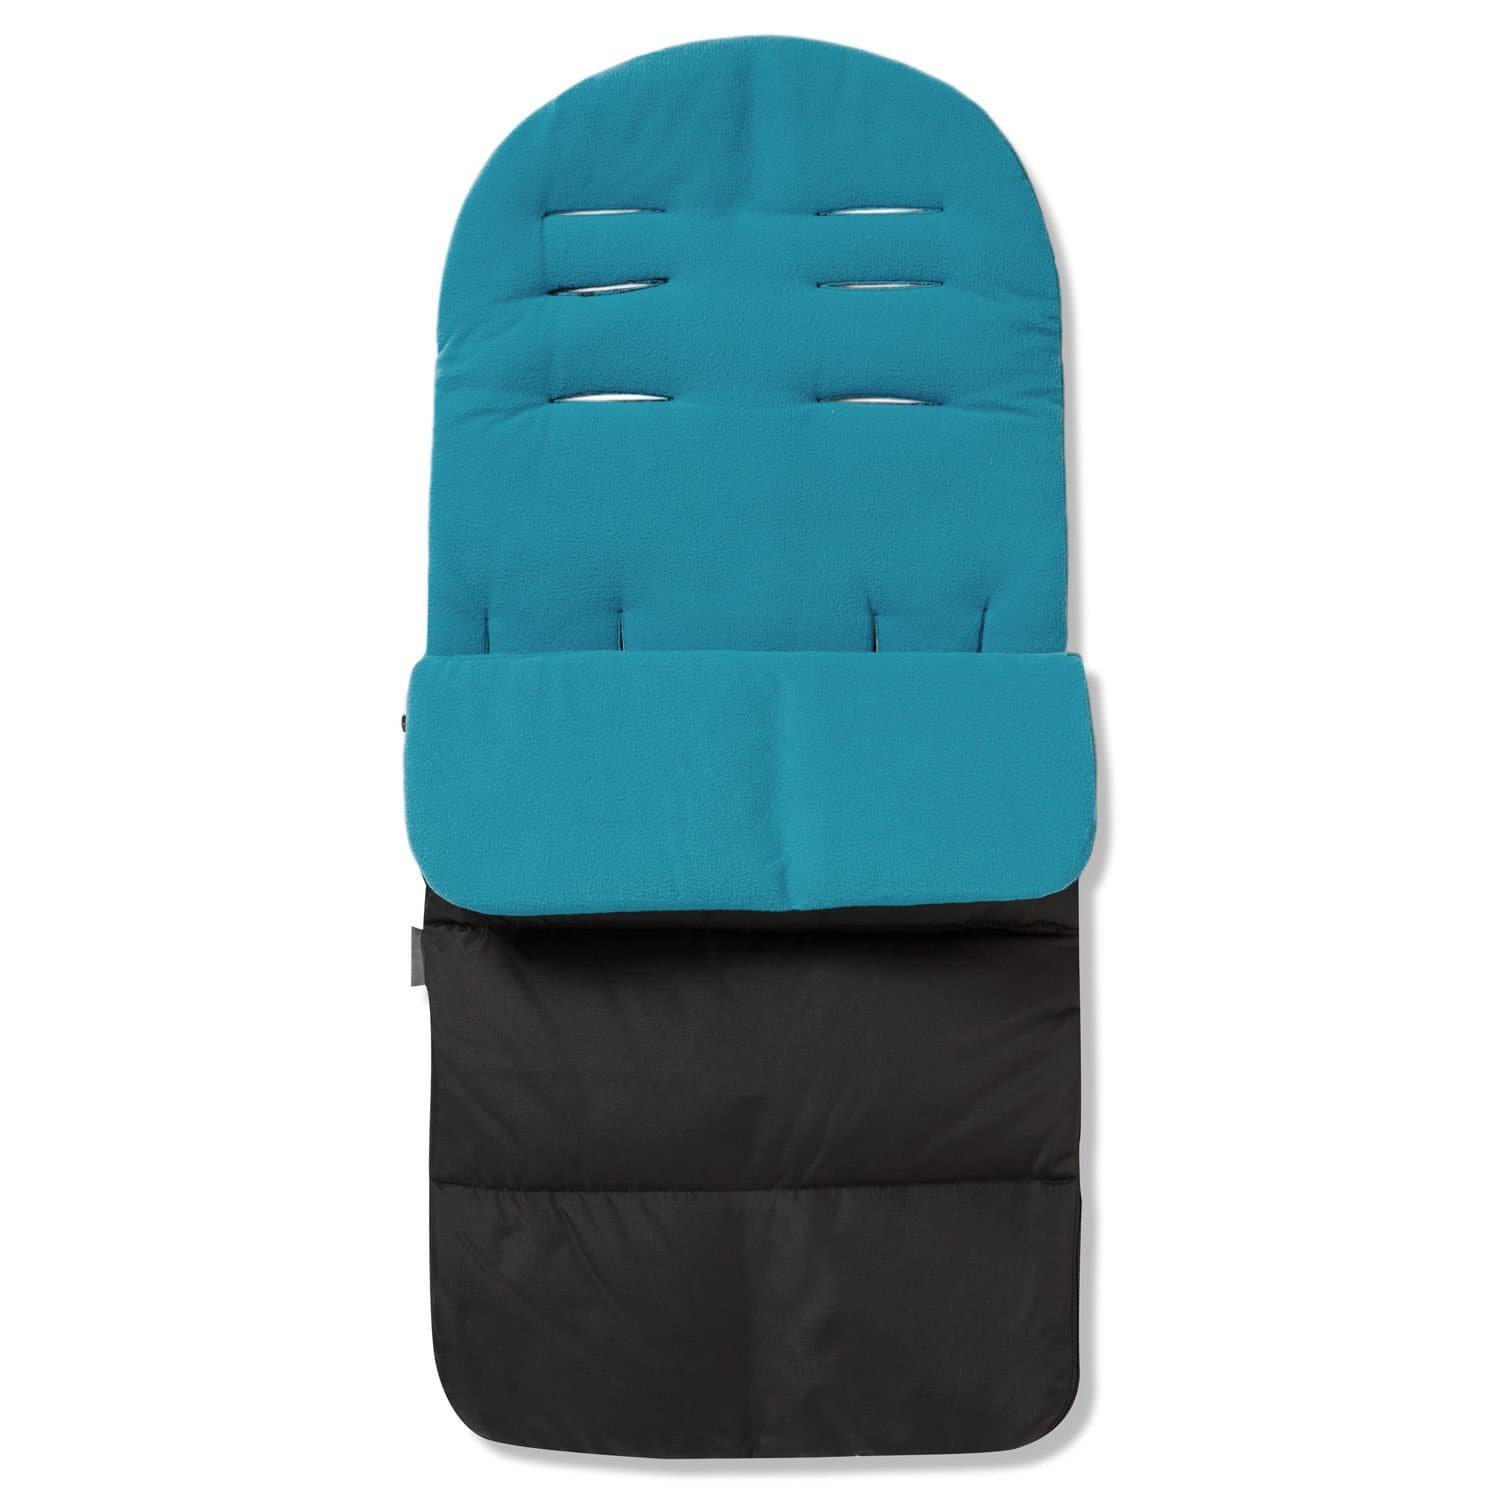 Premium Footmuff / Cosy Toes Compatible with ABC Design - Ocean Blue / Fits All Models | For Your Little One